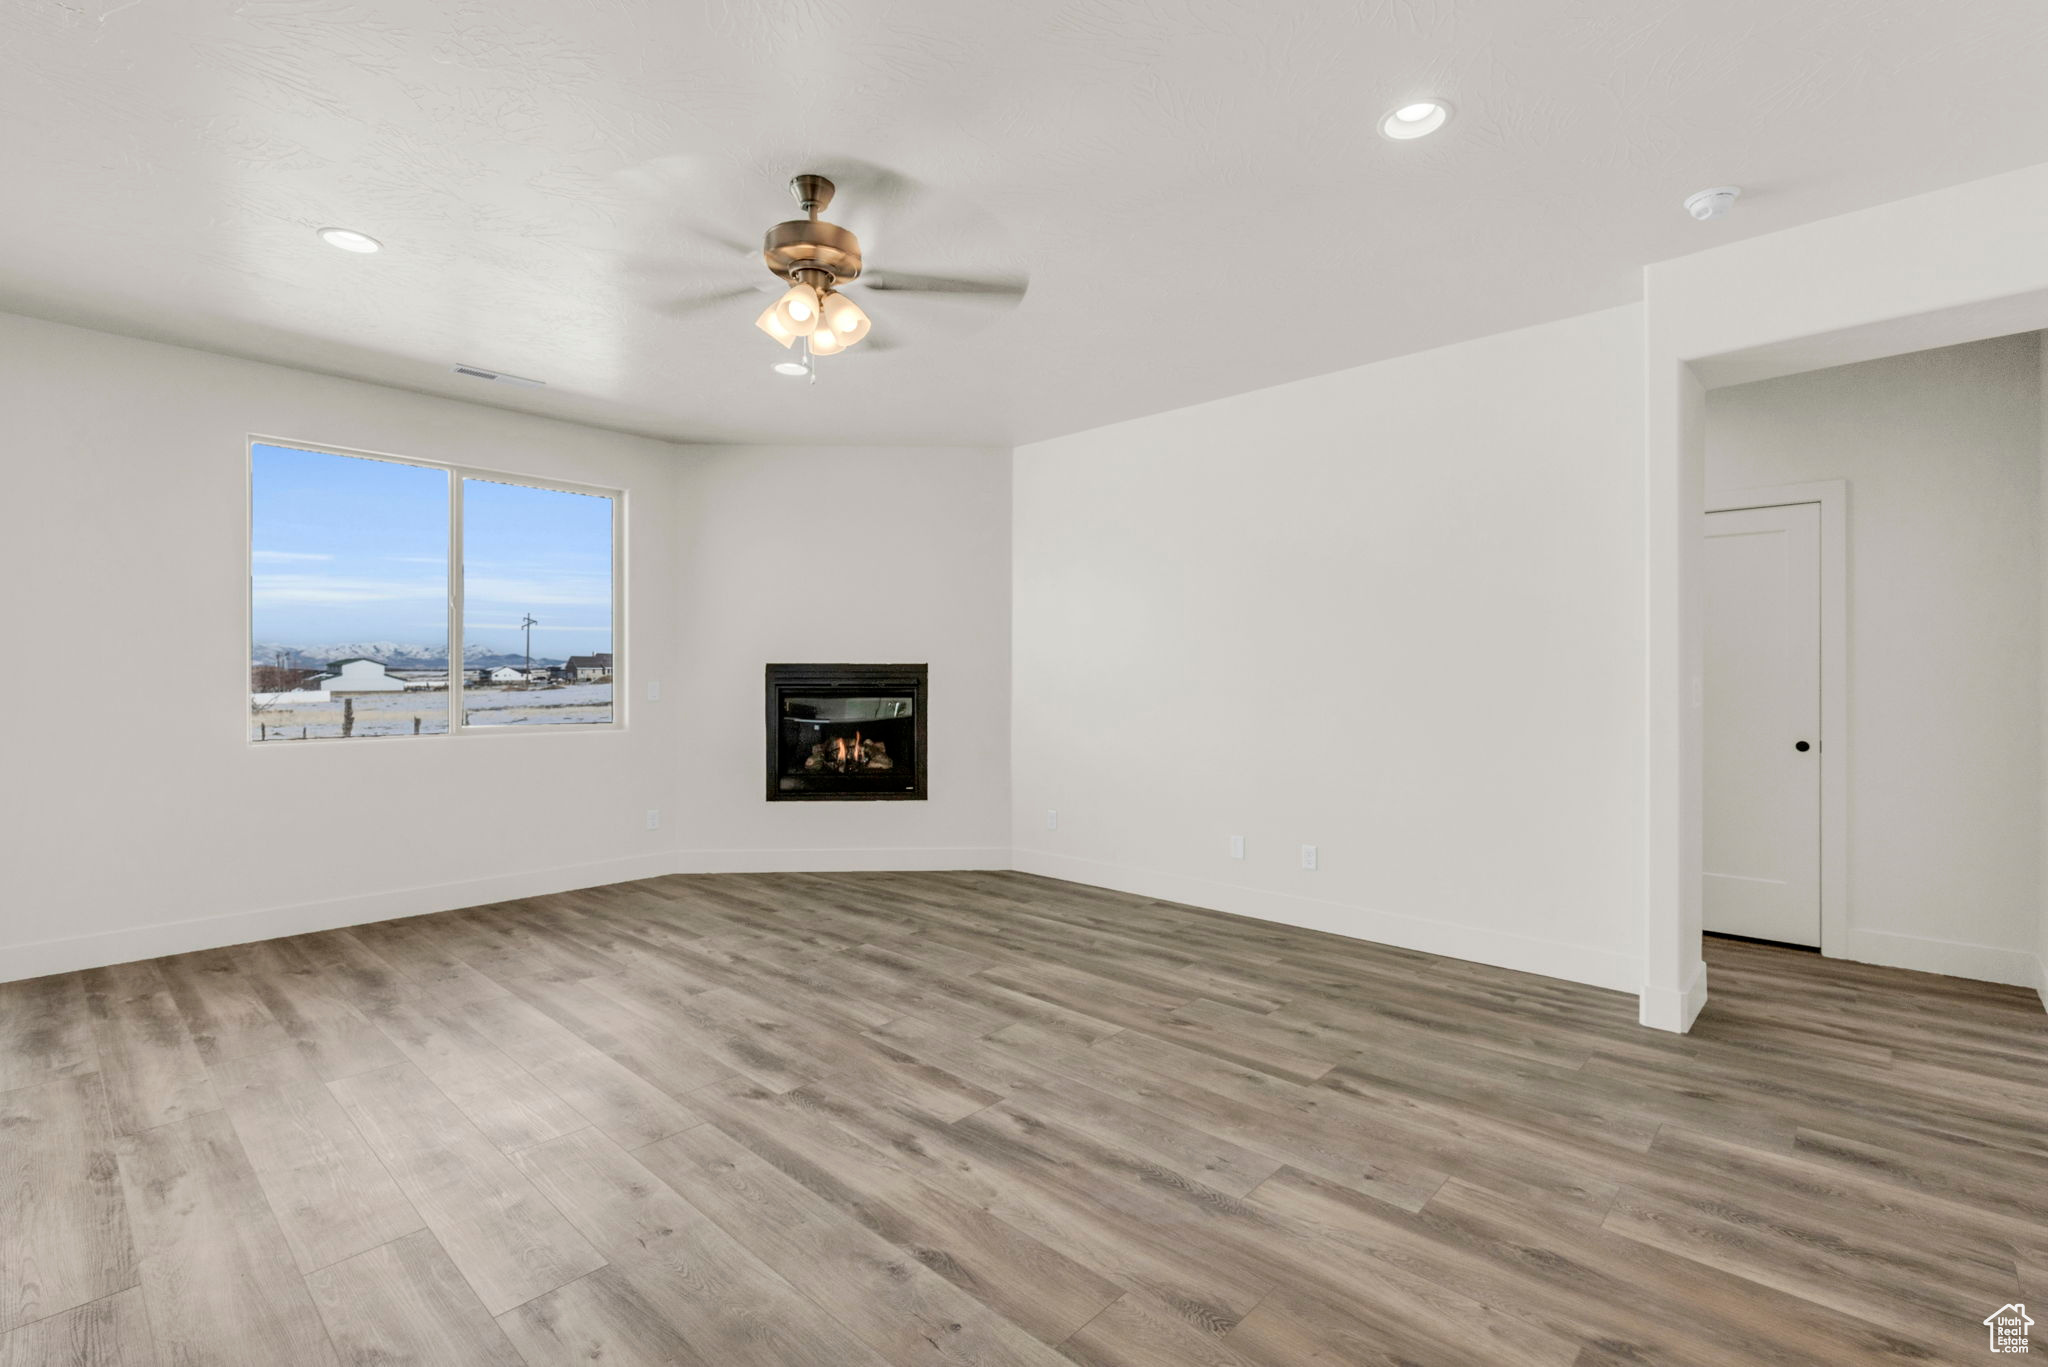 Unfurnished living room featuring ceiling fan and light wood-type flooring